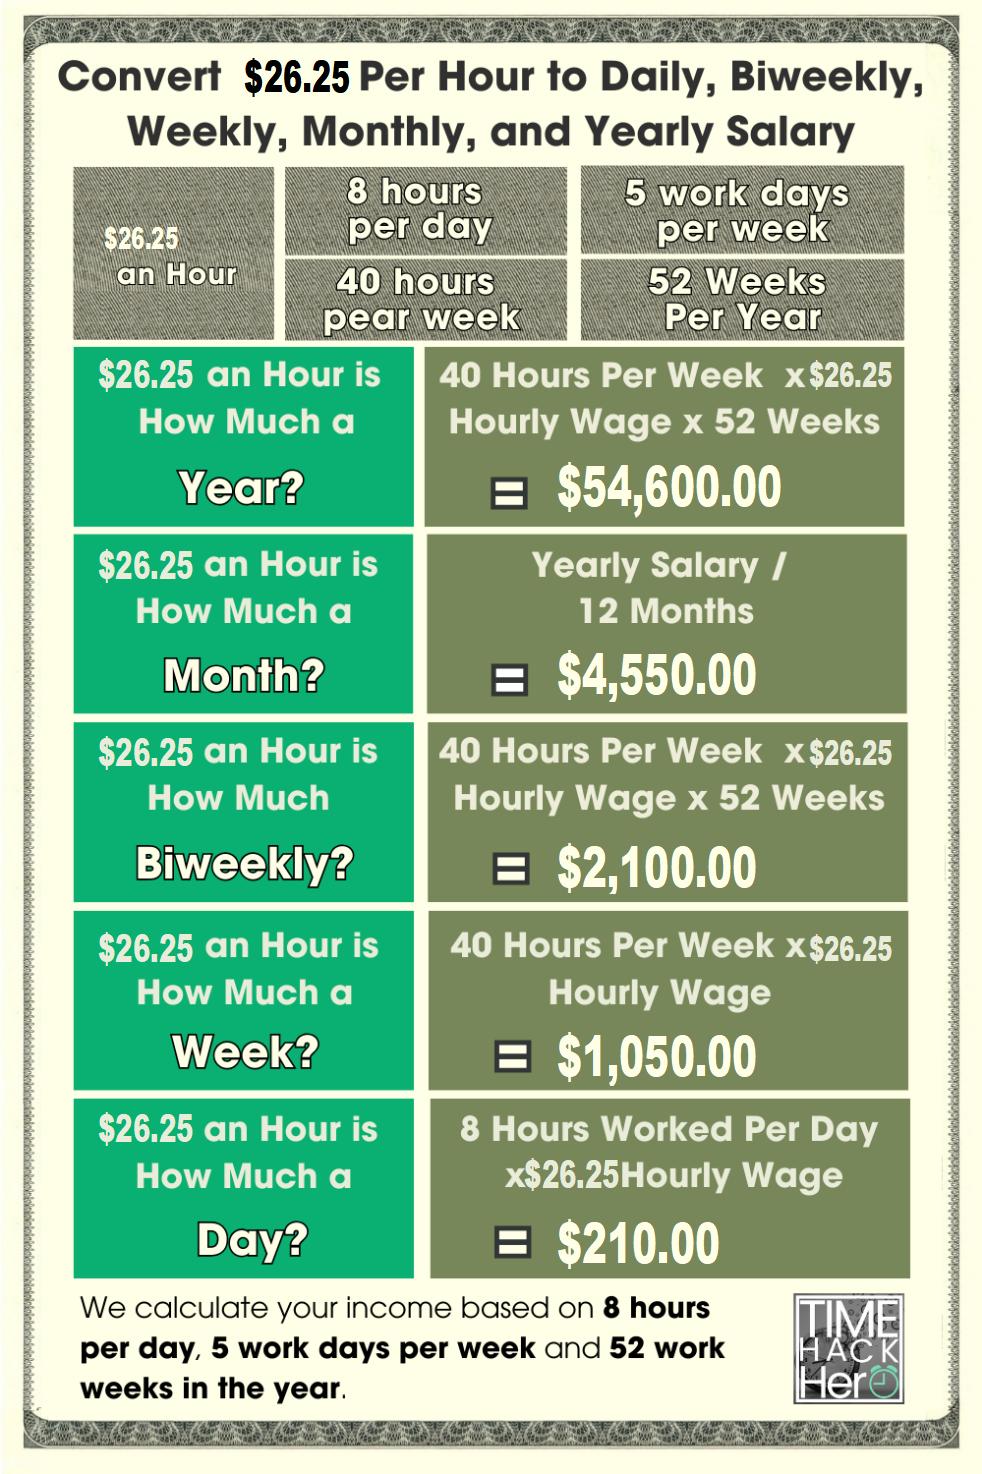 Convert $26.25 Per Hour to Weekly, Monthly, and Yearly Salary